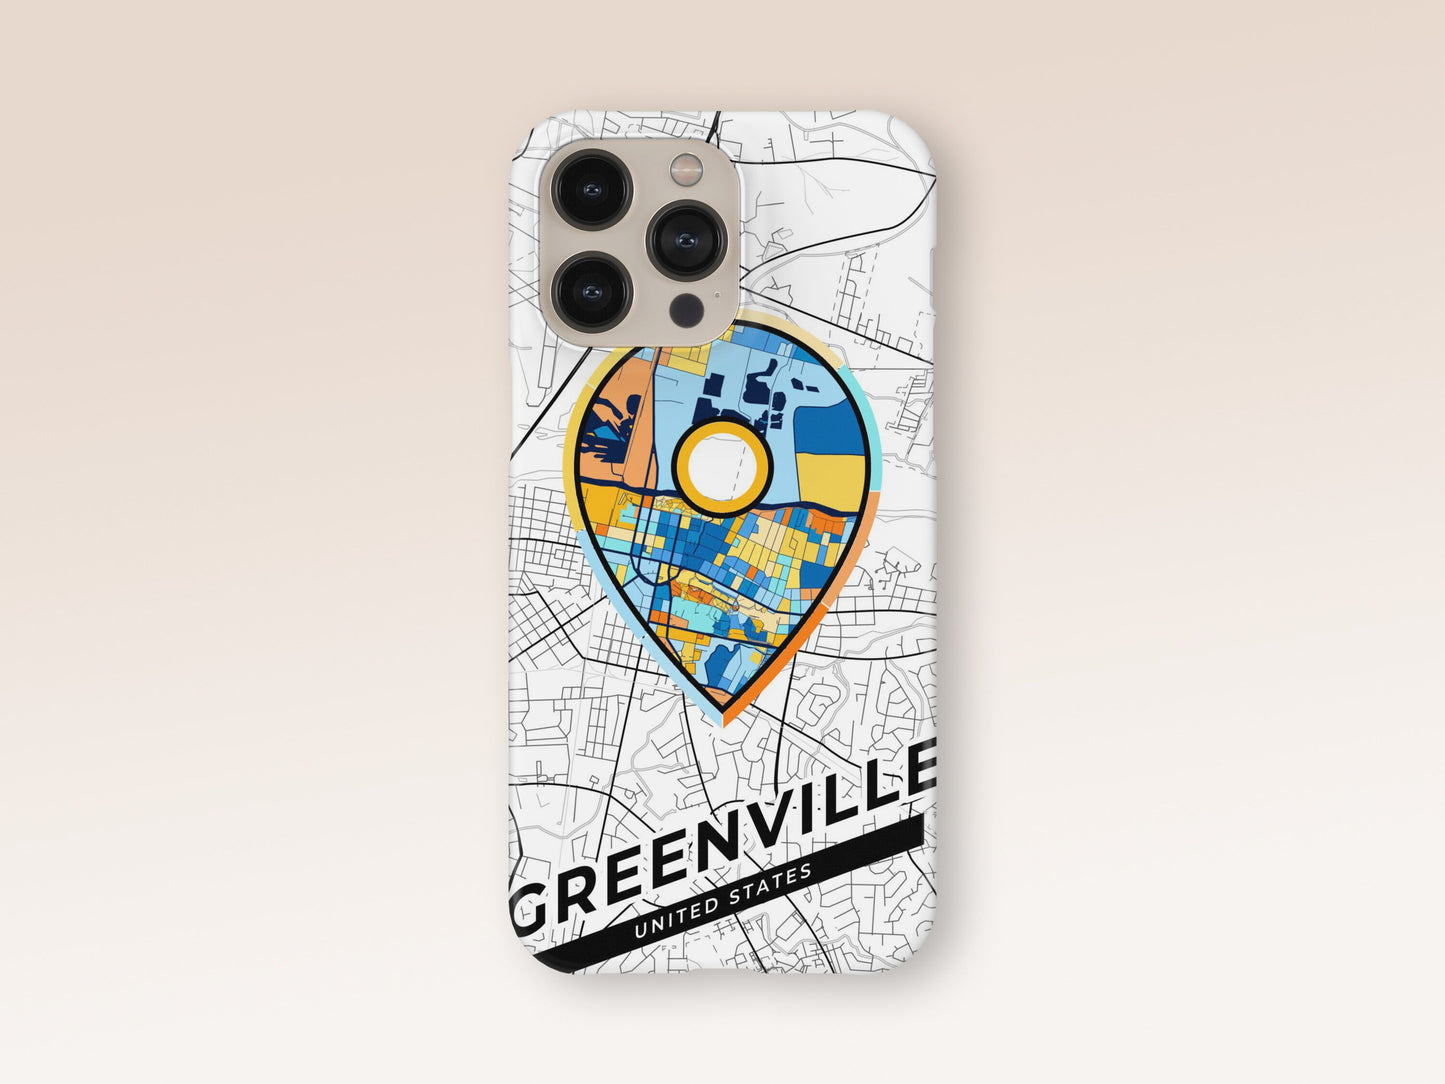 Greenville North Carolina slim phone case with colorful icon. Birthday, wedding or housewarming gift. Couple match cases. 1